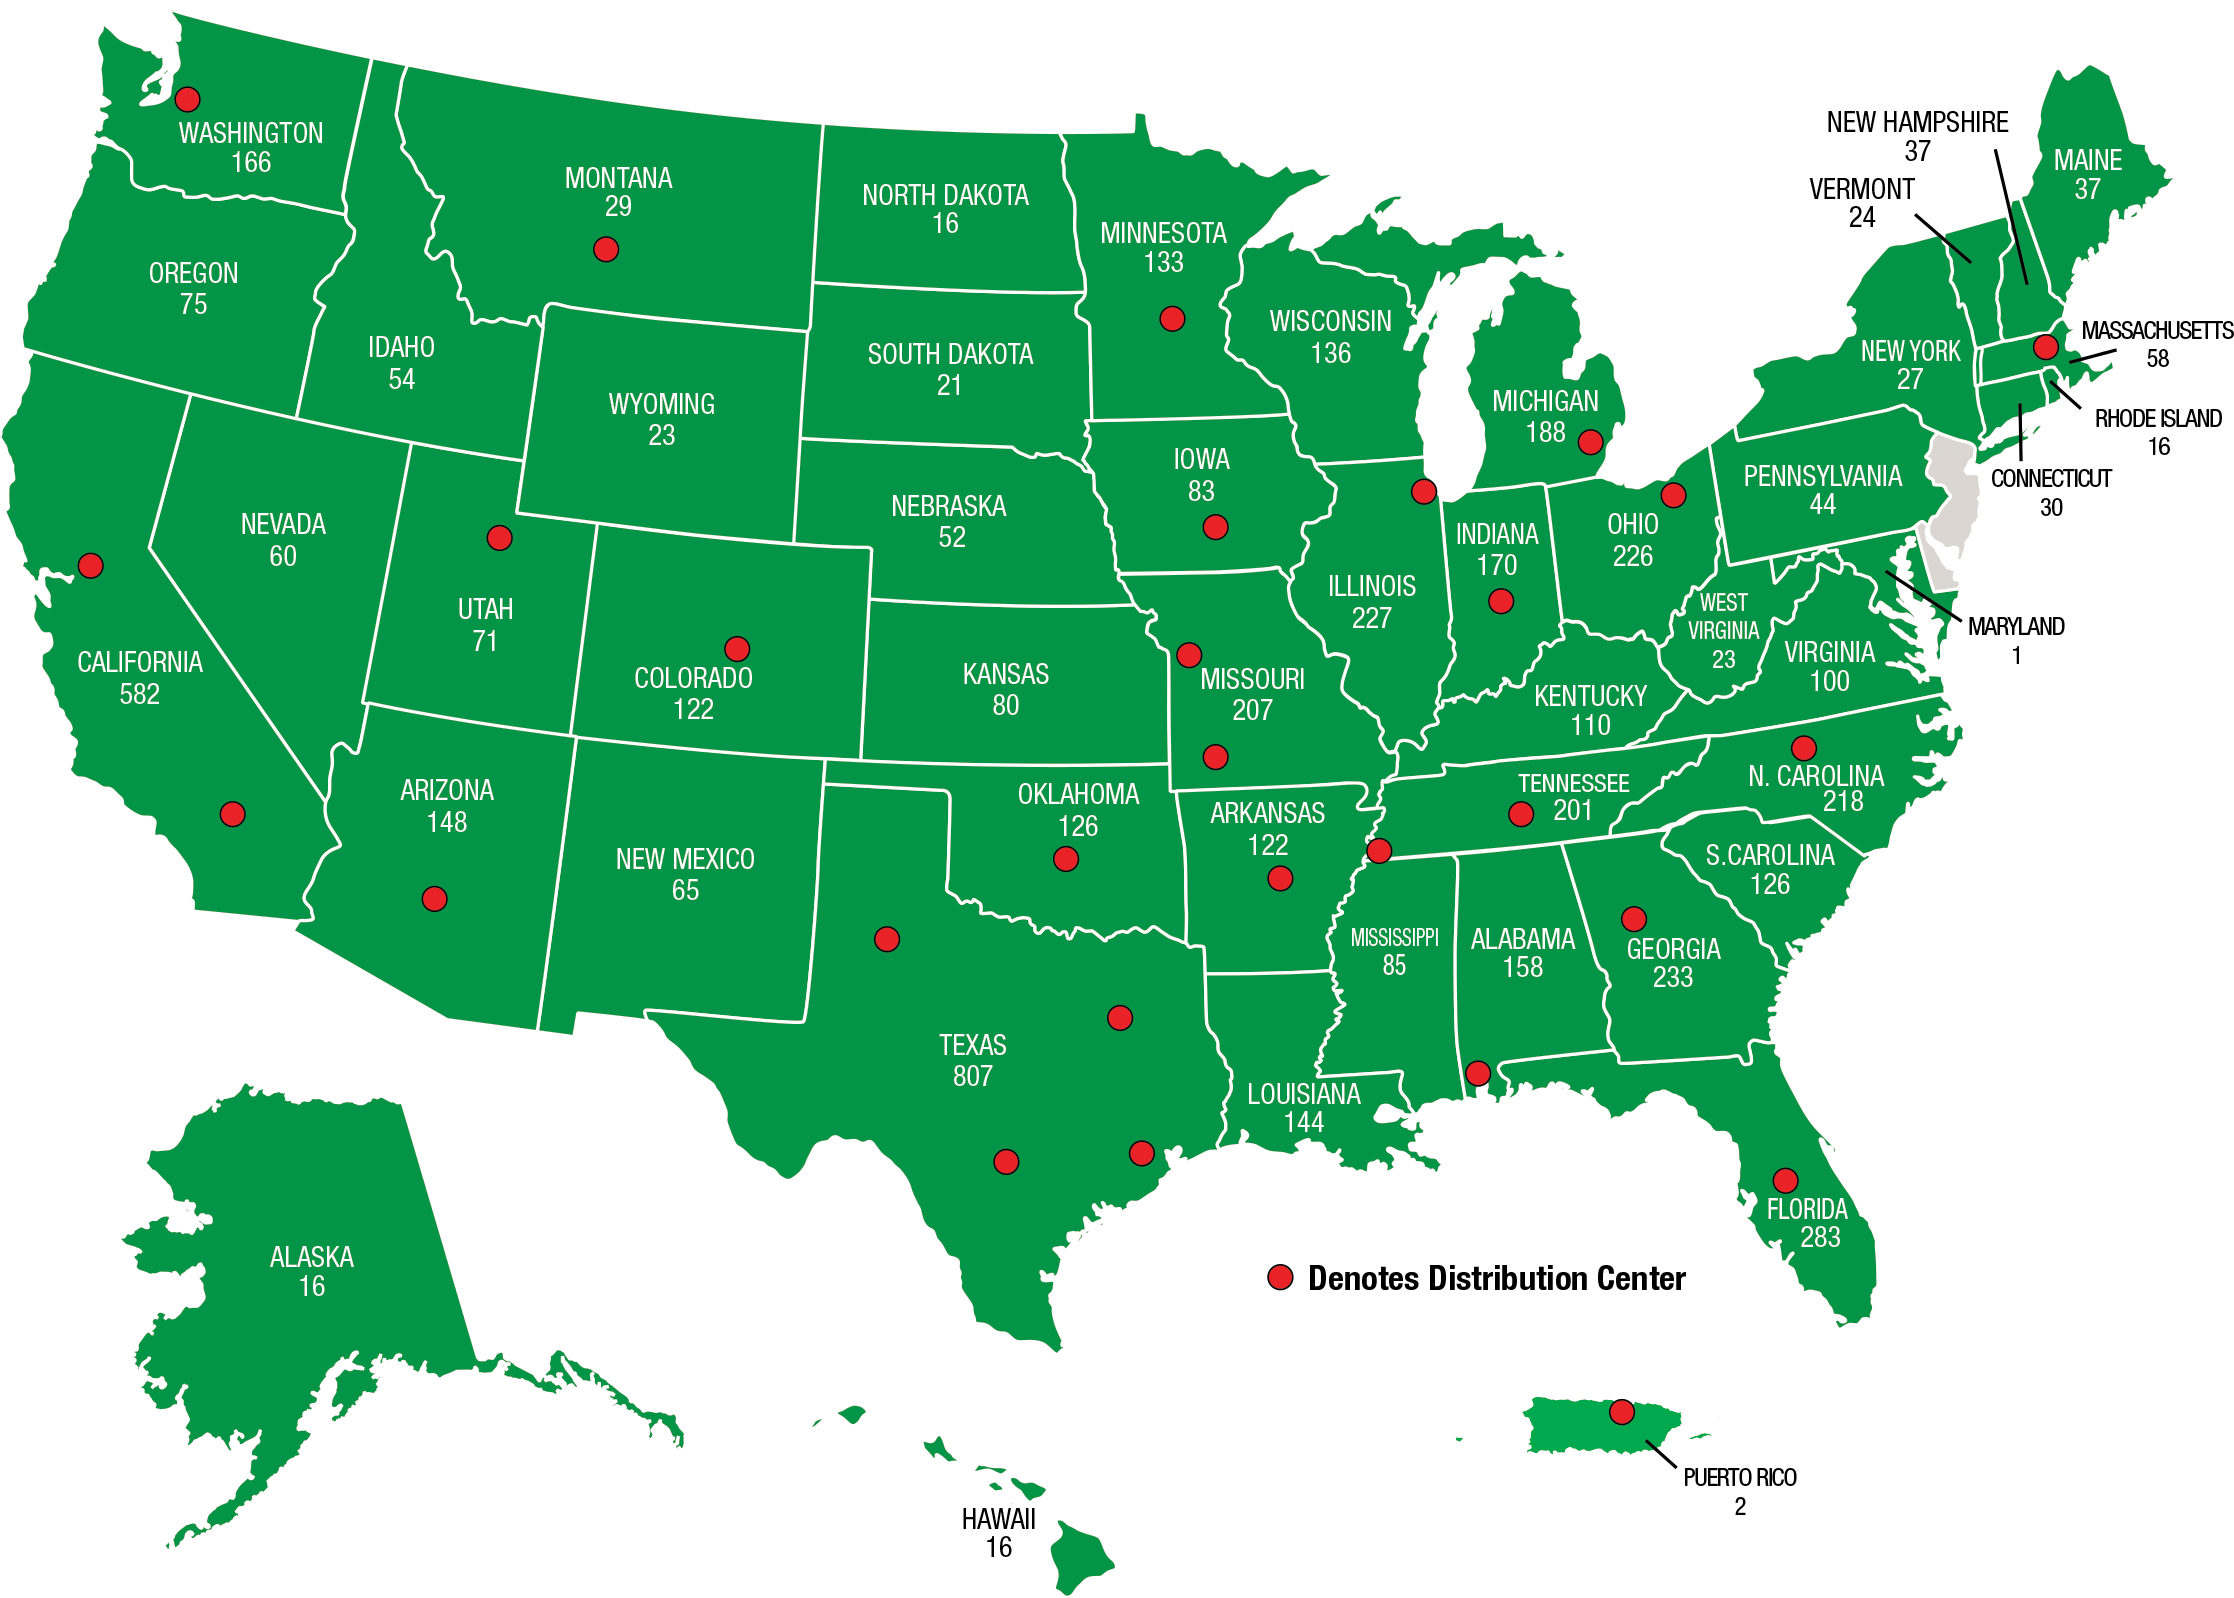 All O'Reilly Auto Parts Stores in the United States by states